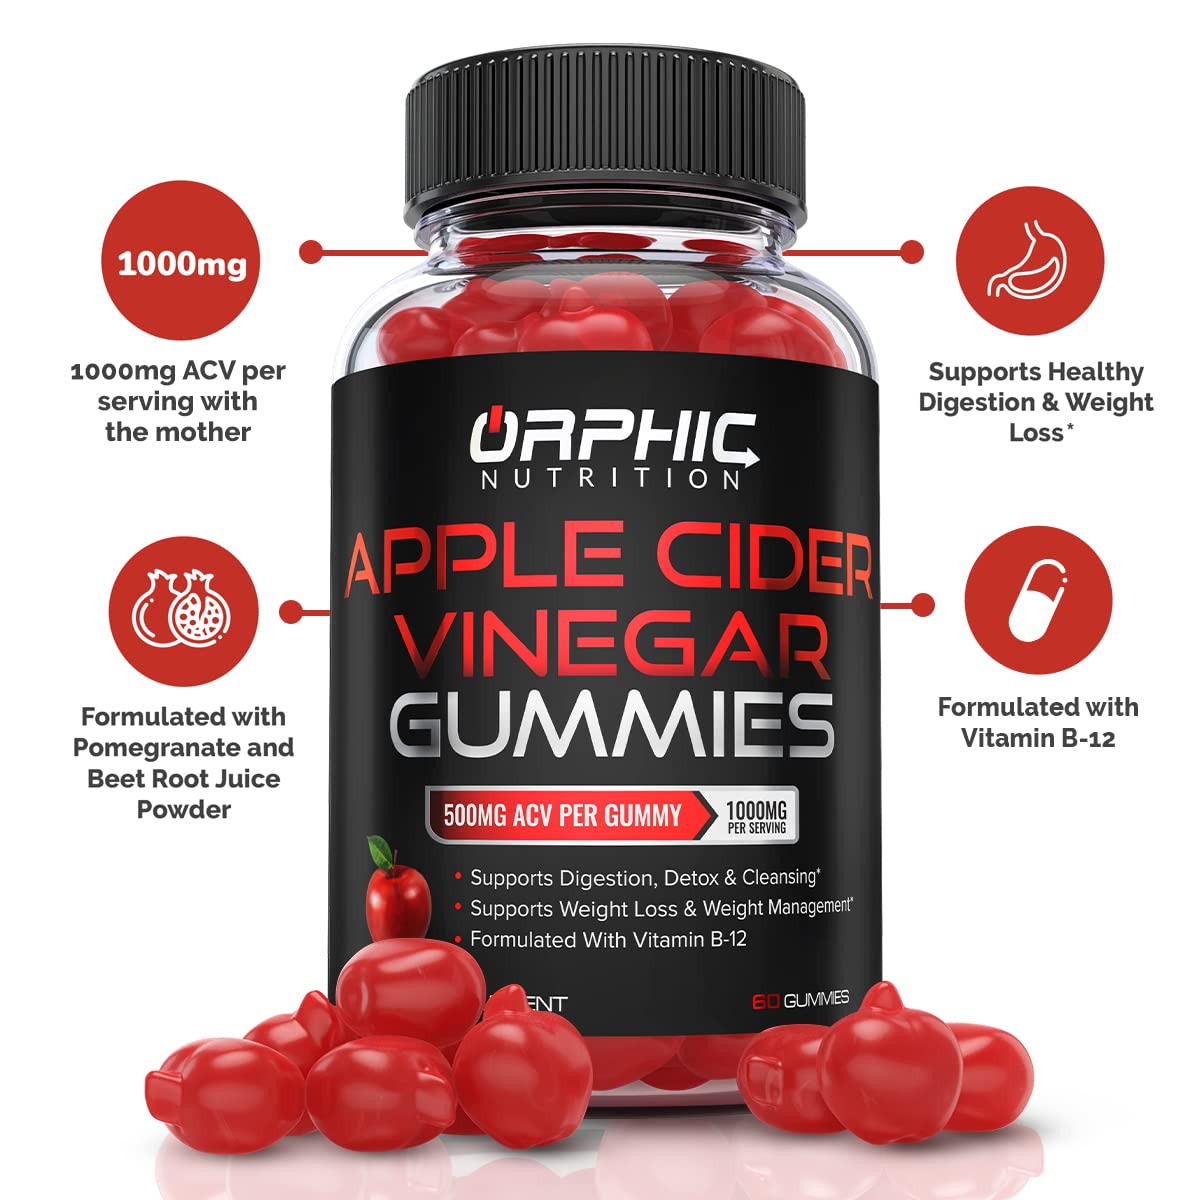 Apple Cider Vinegar Gummies - 1000mg -Formulated to Support Weight Loss Efforts, Normal Energy Levels & Gut Health* - Supports Digestion, Detox & Cleansing* - ACV Gummies W/VIT B12, Beetroot